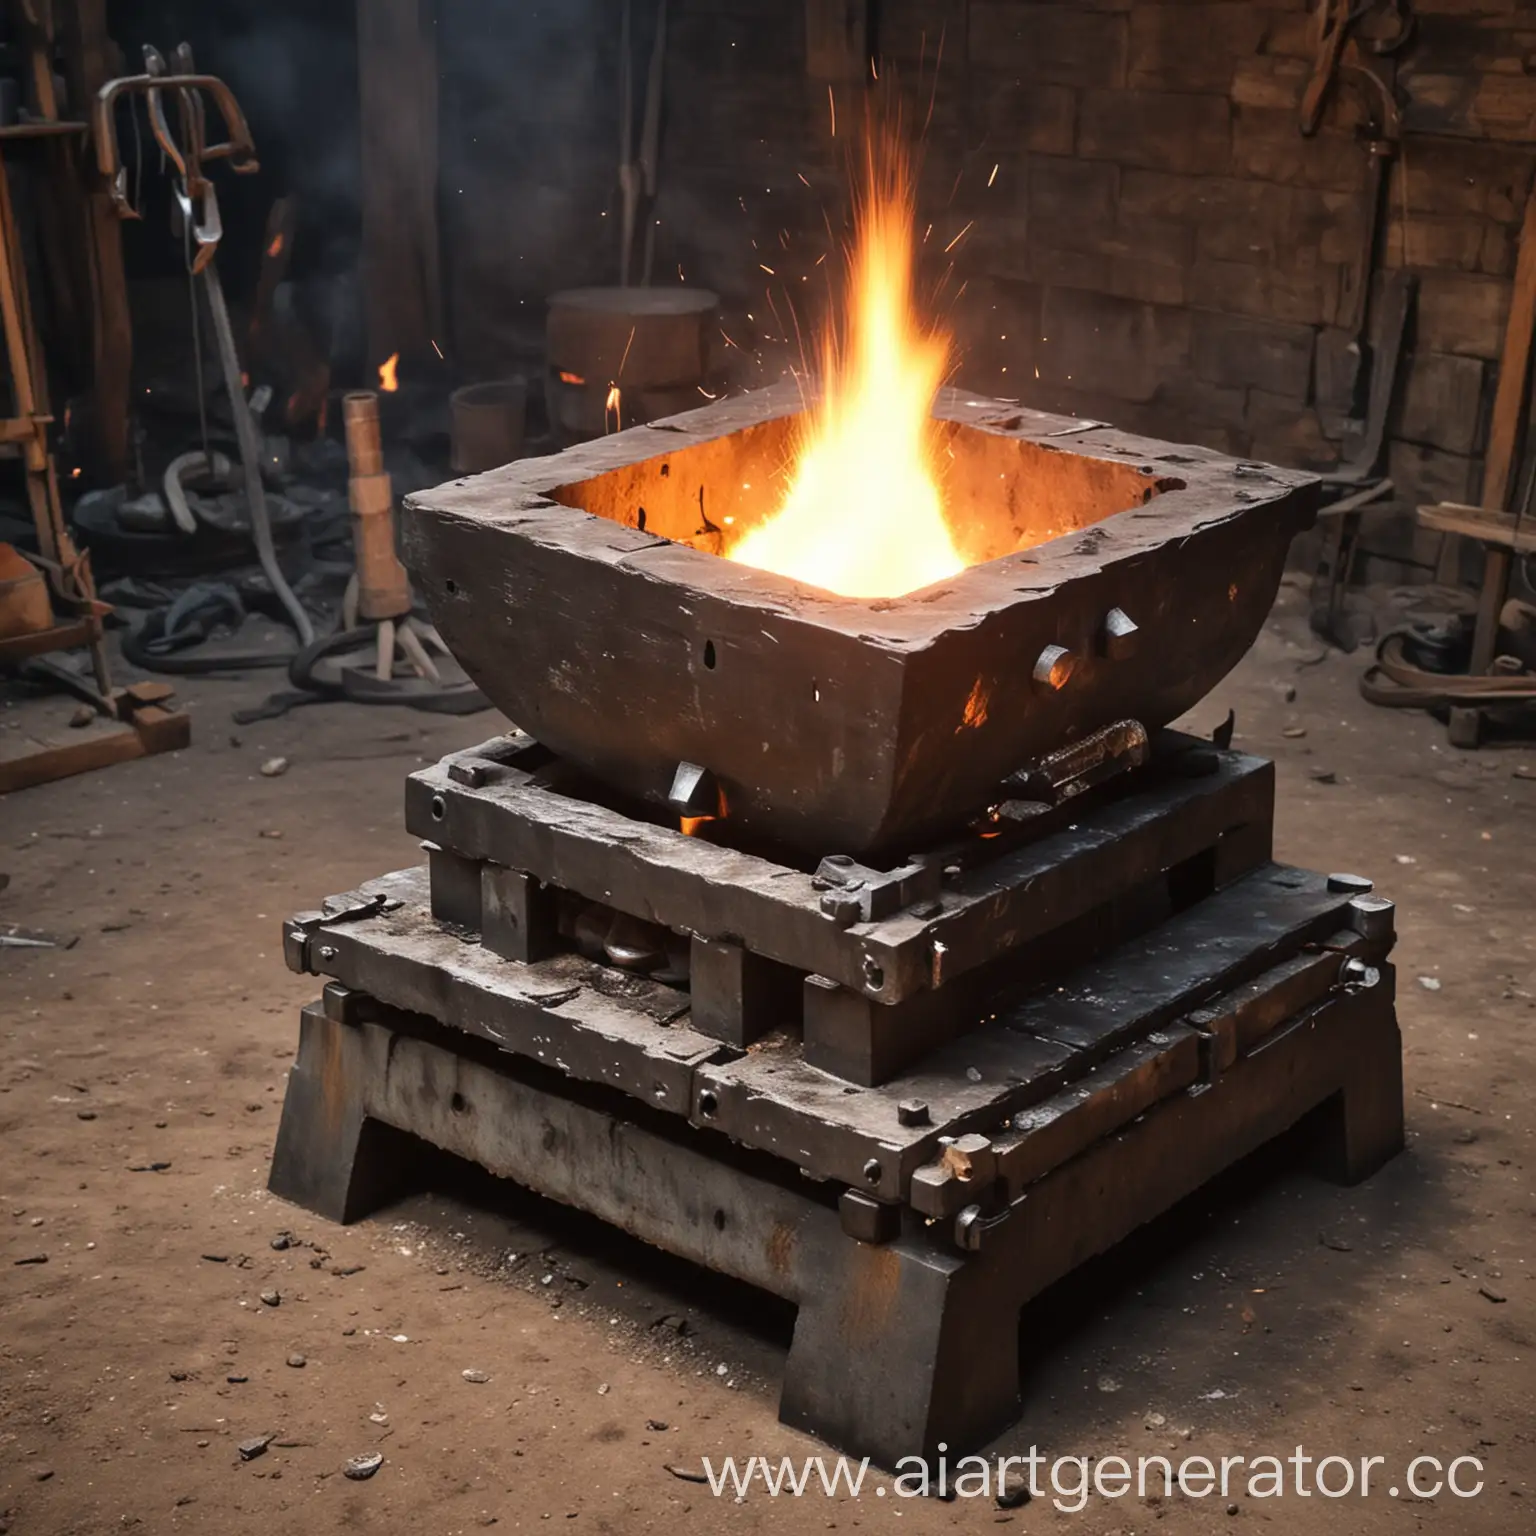 Metal-Forging-Process-Skilled-Workers-Shaping-Molten-Metal